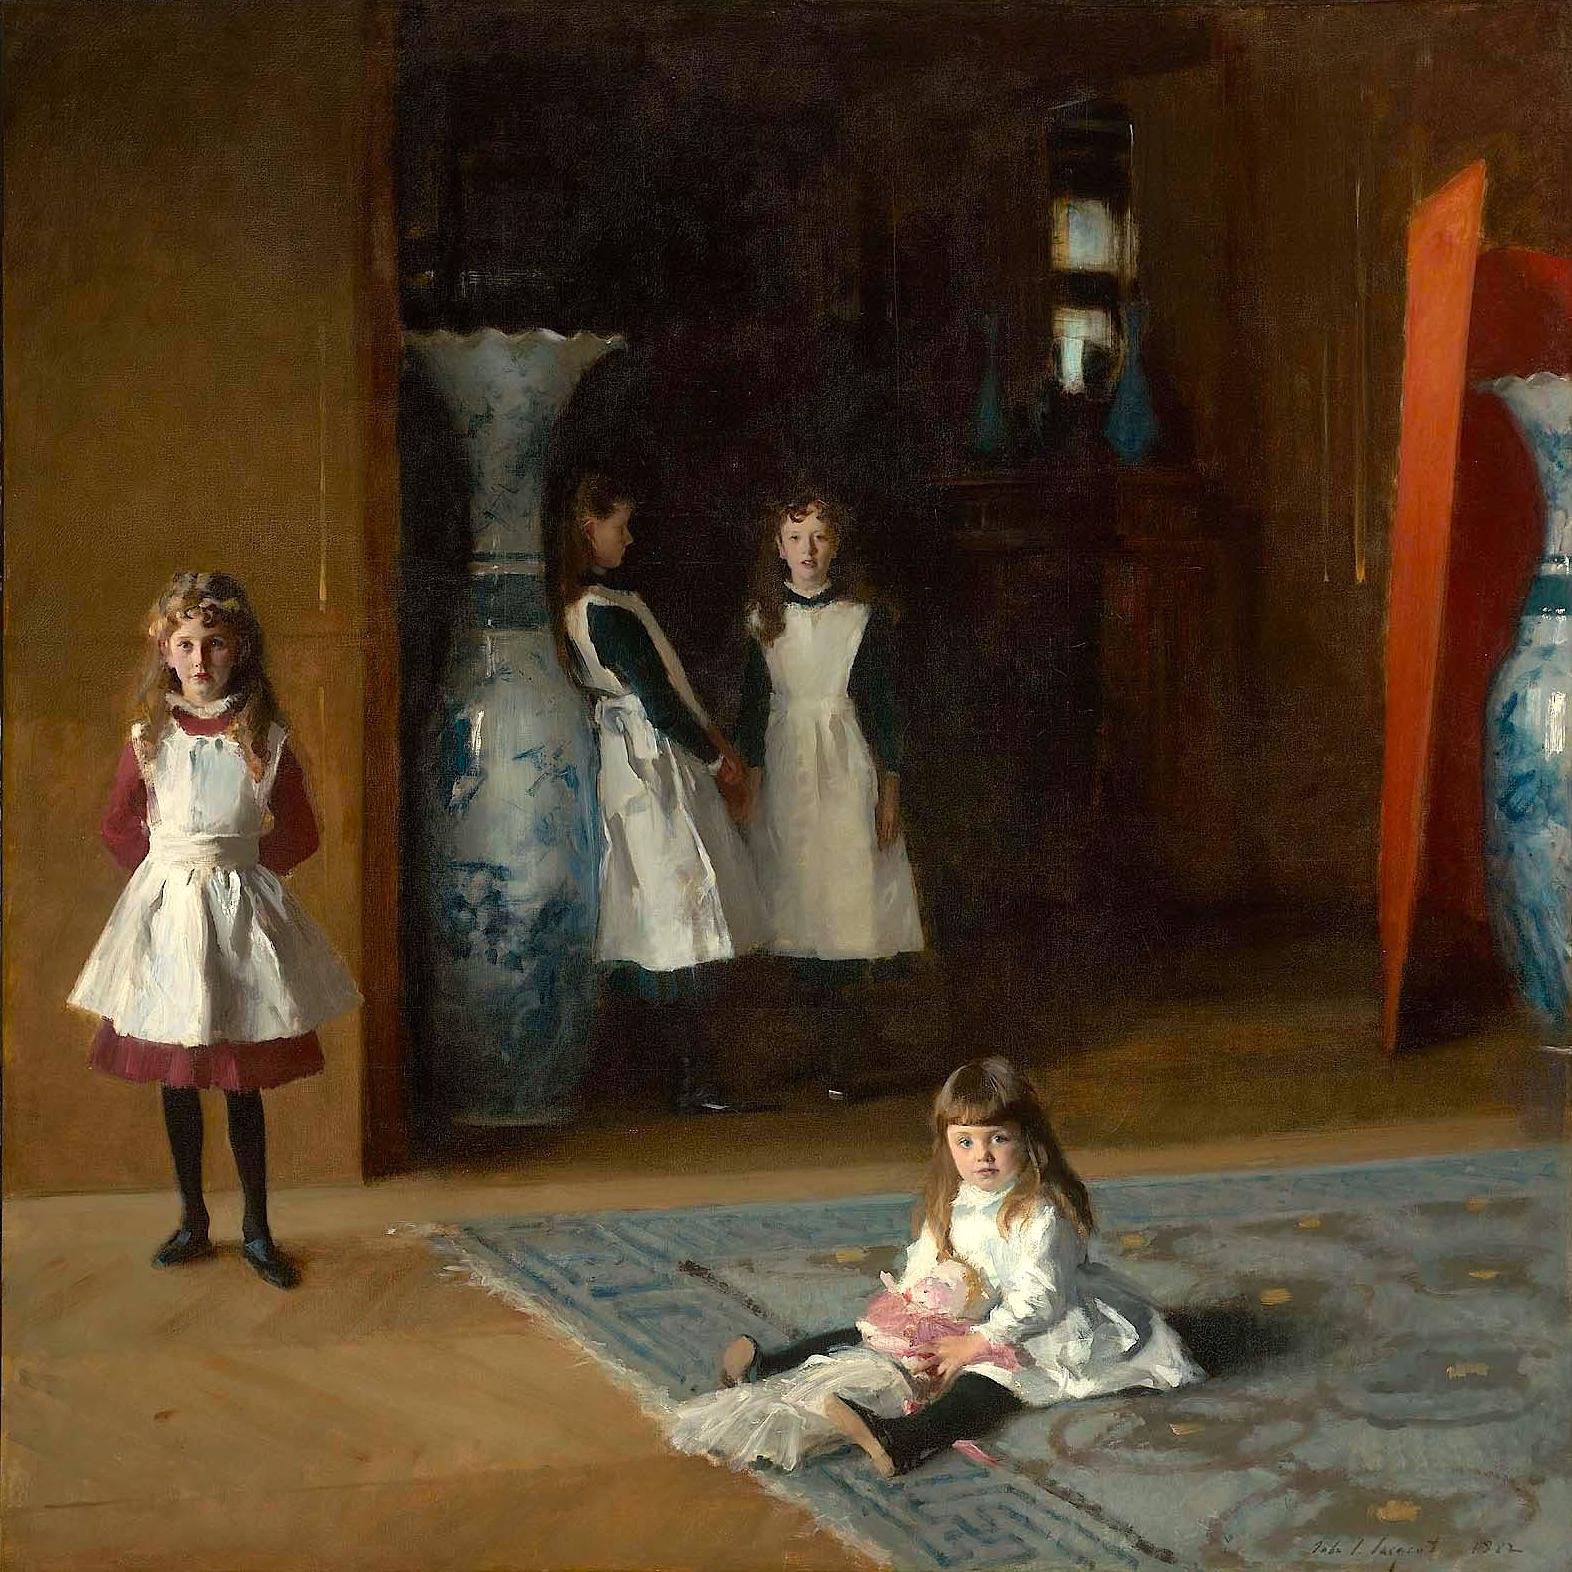 The Daughters of Edward Darley Boit By John Singer Sargent (American, 1856–1925) 1882 - free art - via MFA in Boston